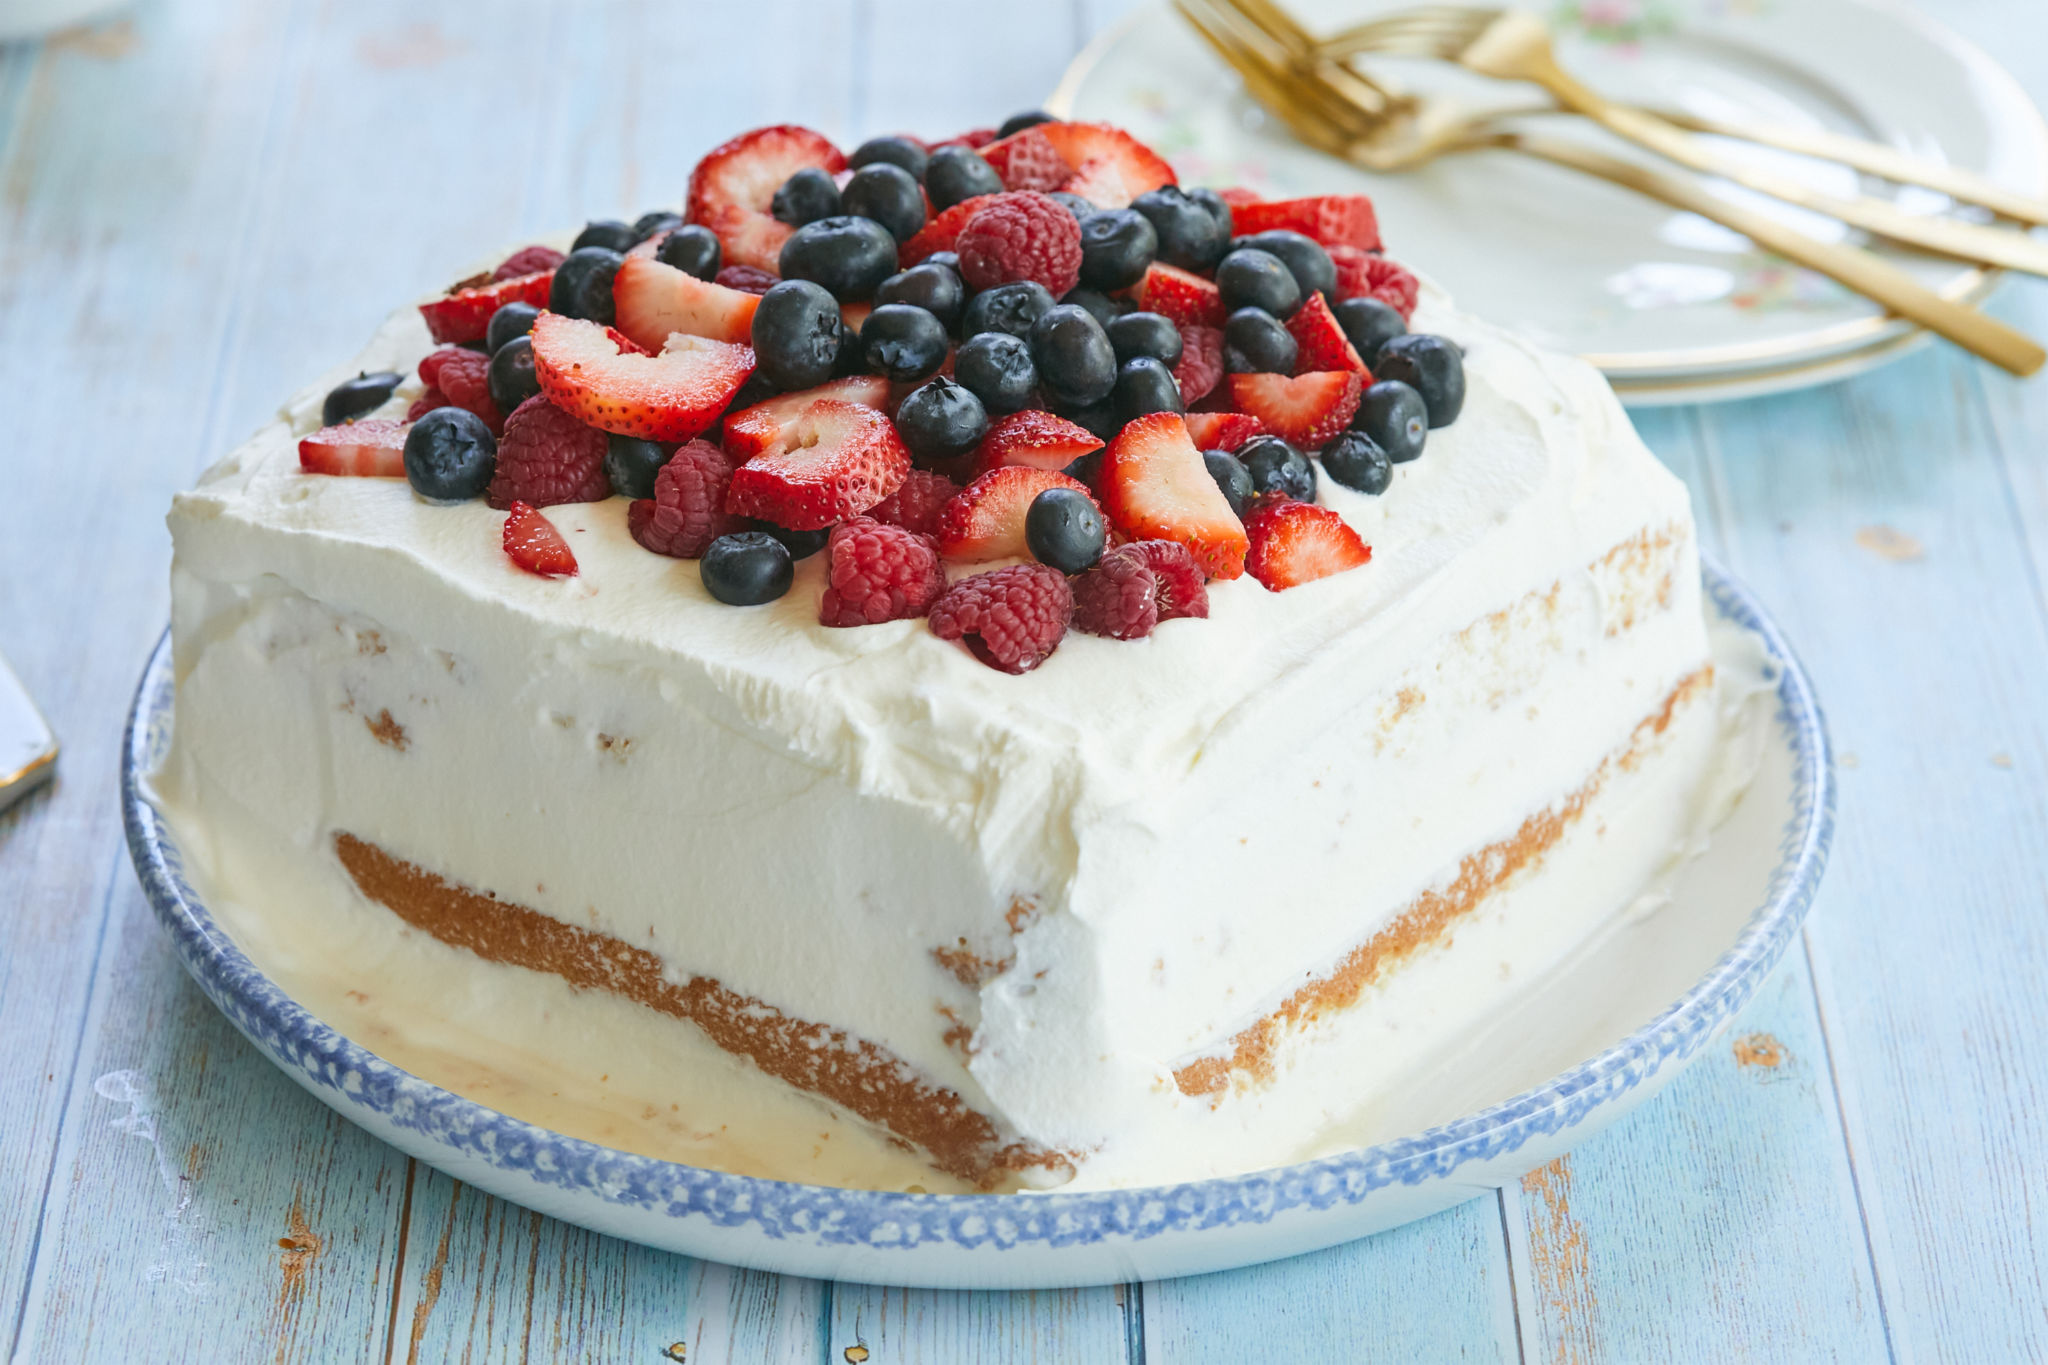 What are Some Tips for Decorating a Tres Leches Cake